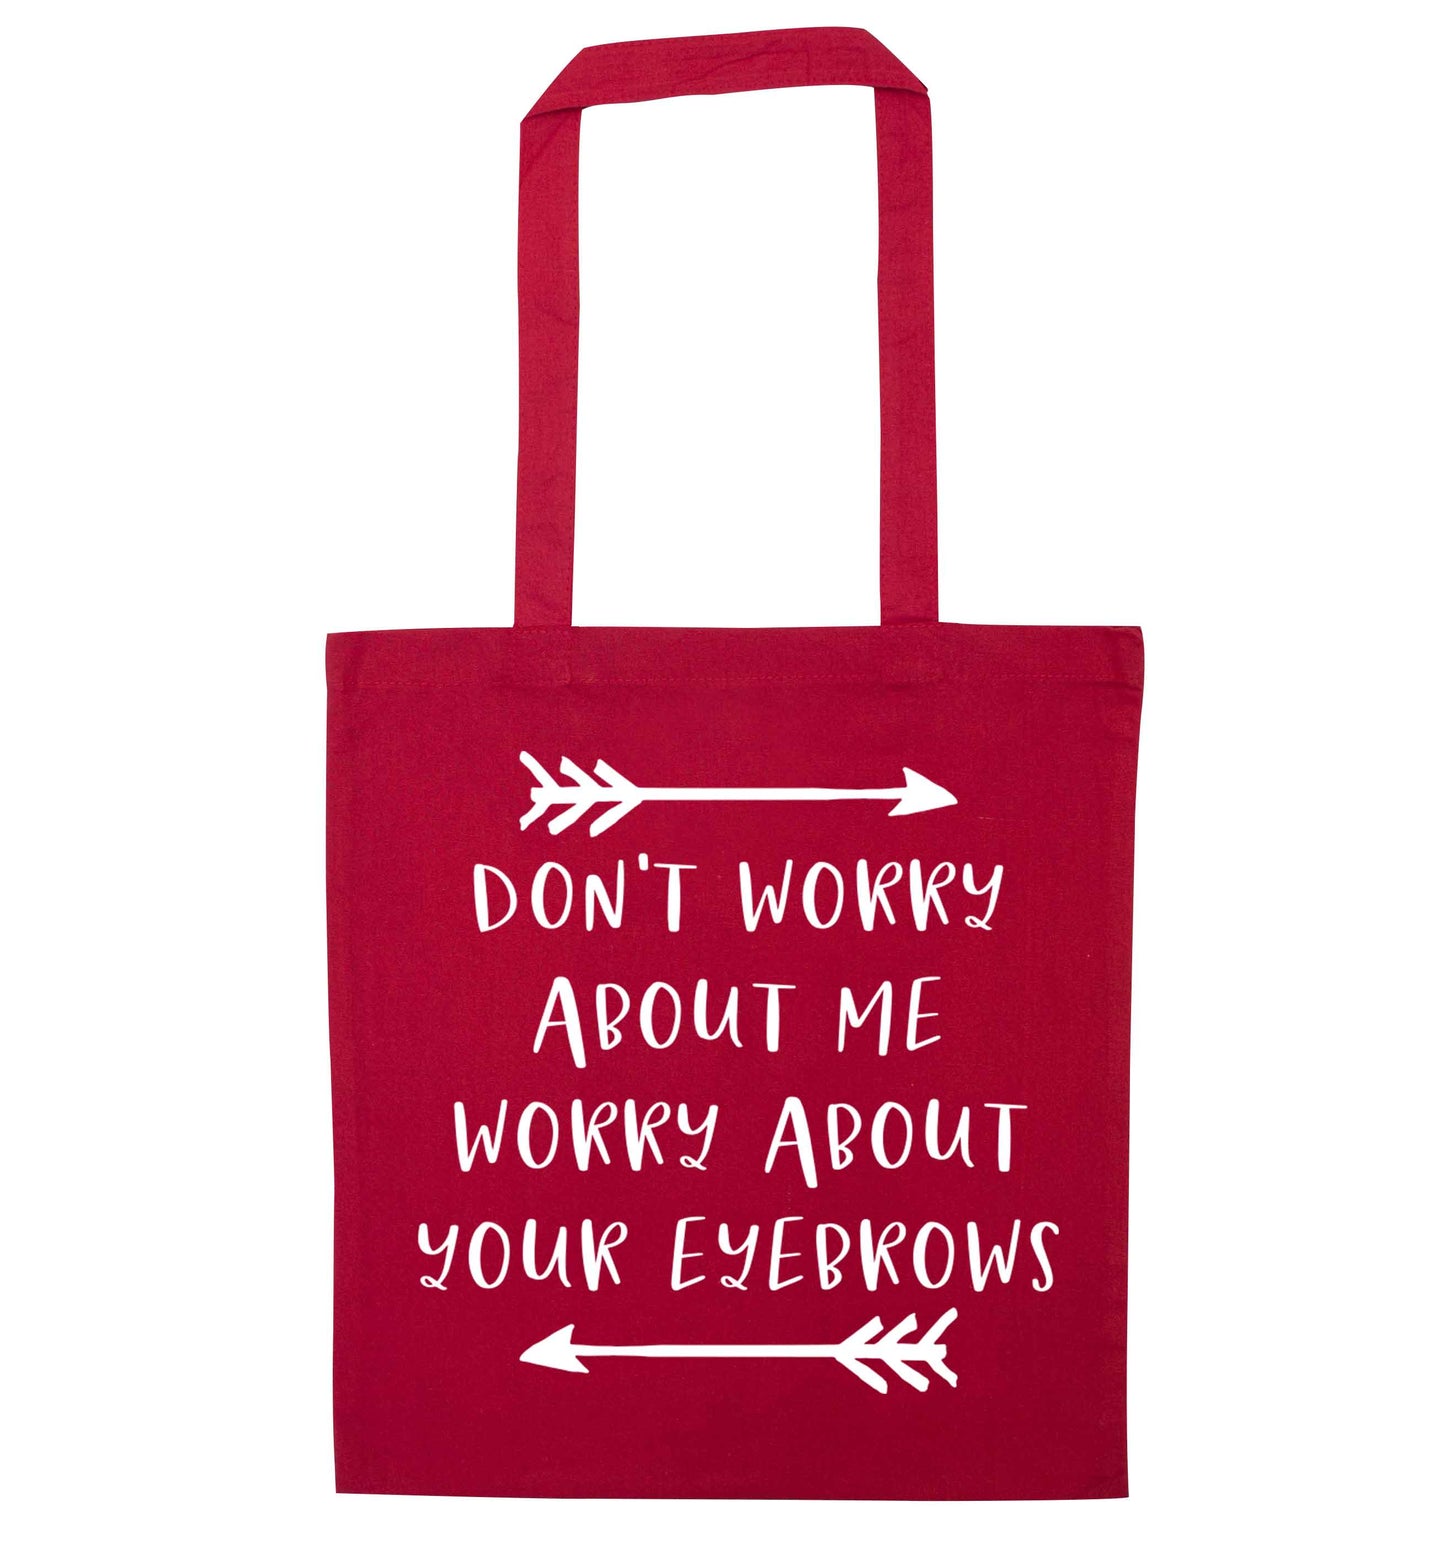 Don't worry about me worry about your eyebrows red tote bag